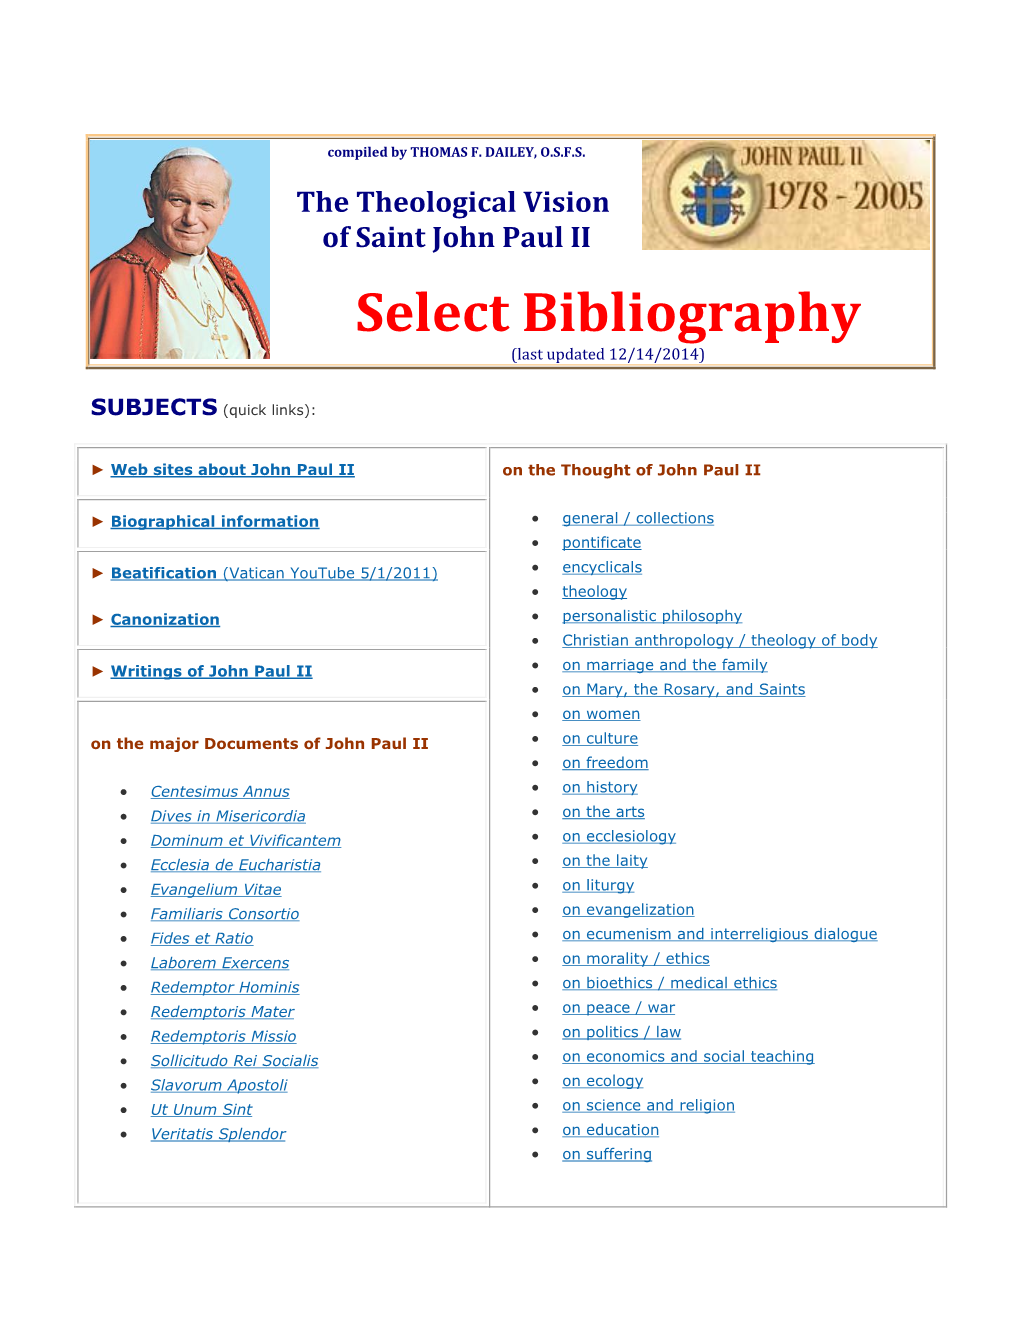 Select Bibliography (Last Updated 12/14/2014)